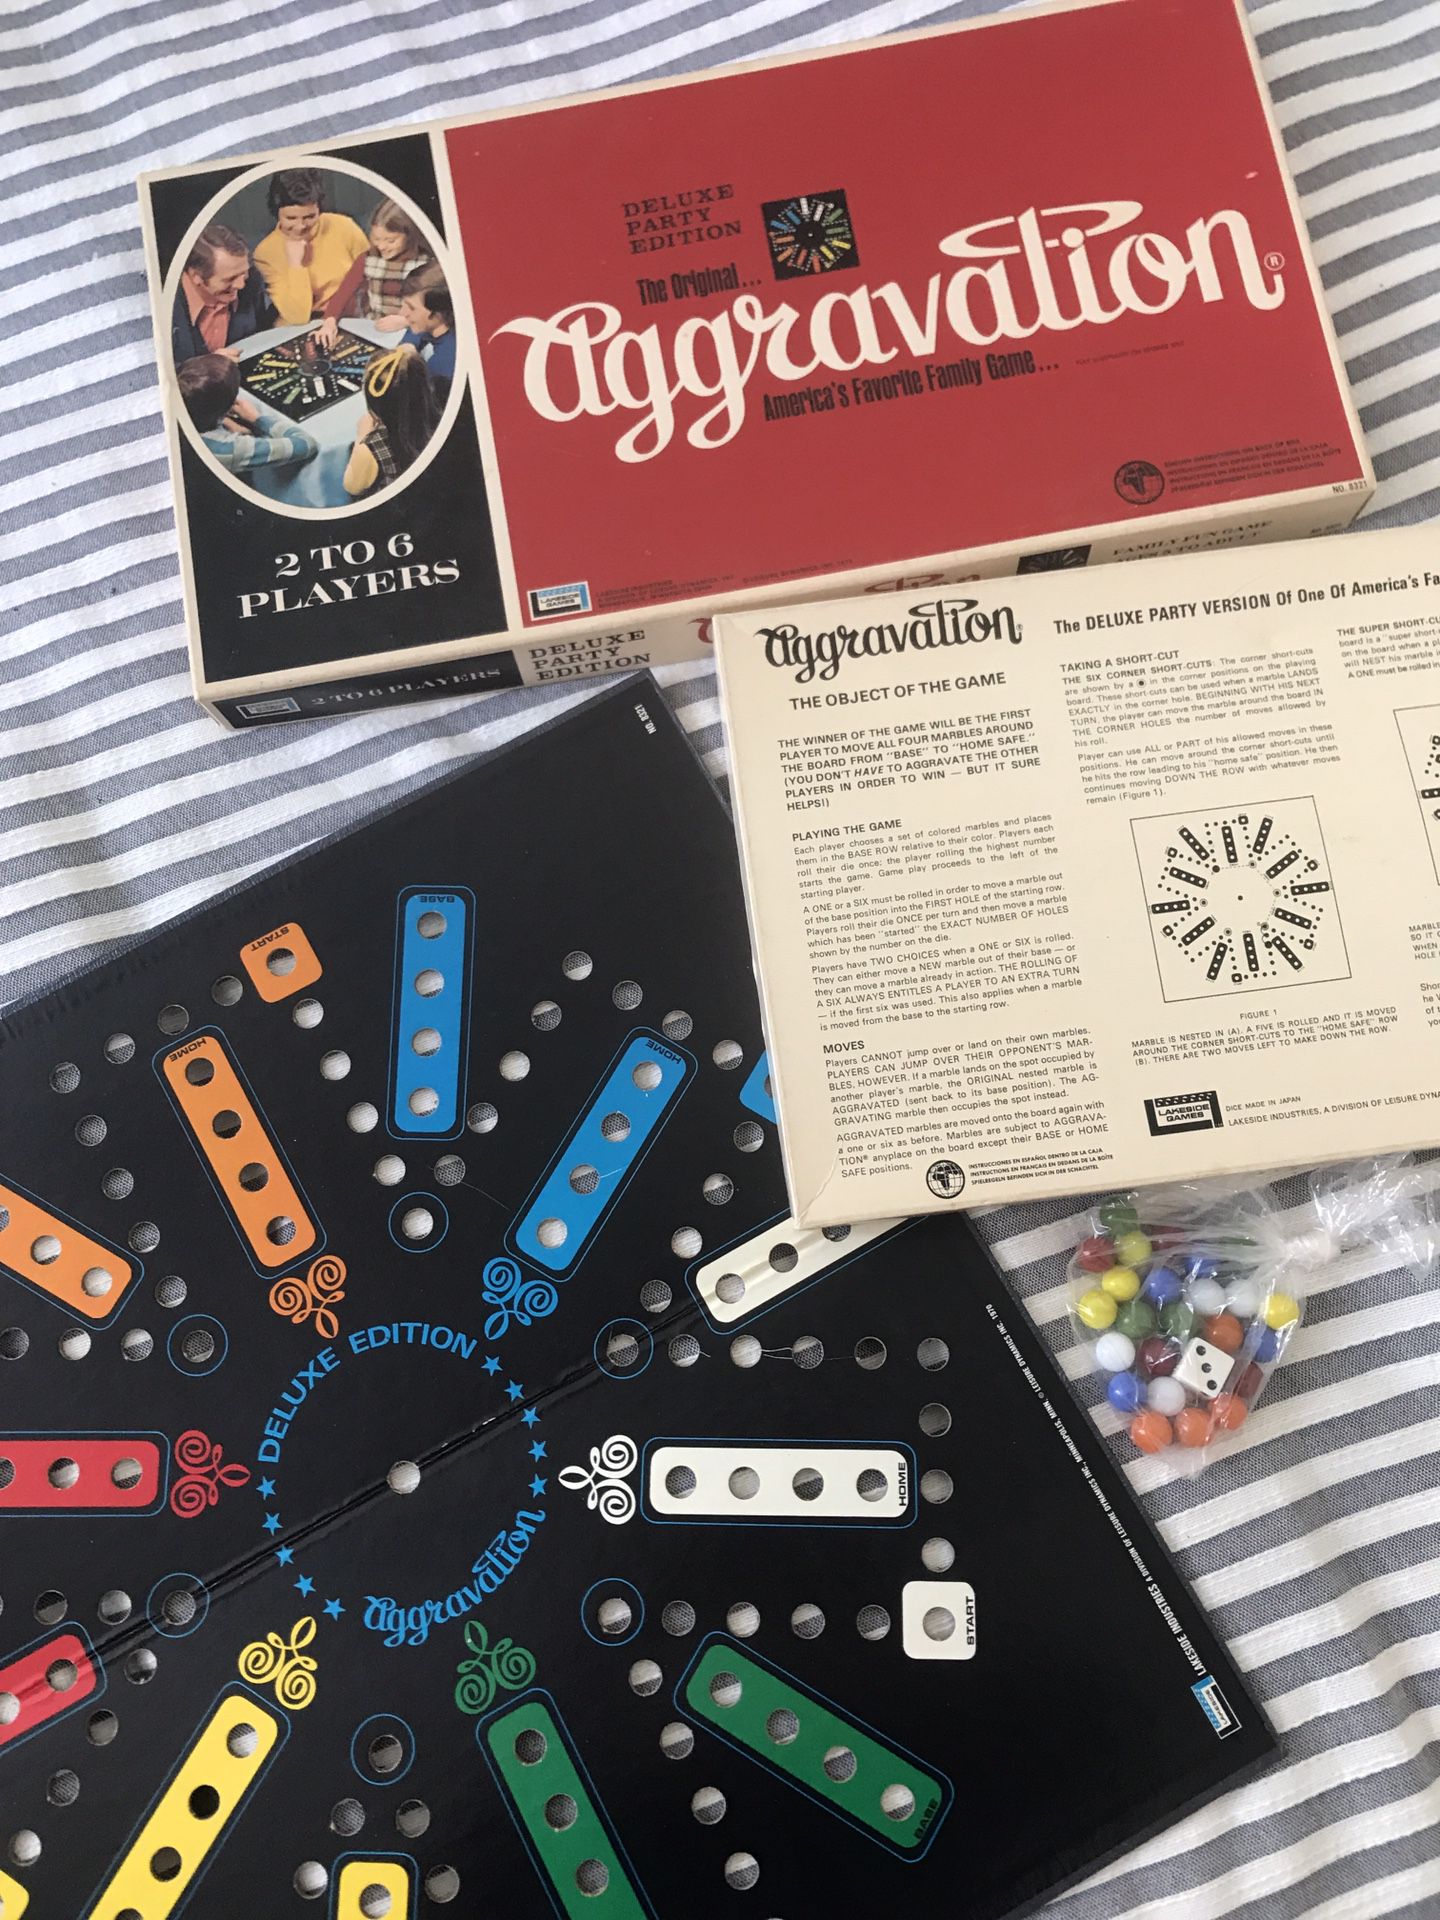 Aggravation board game 1972 edition